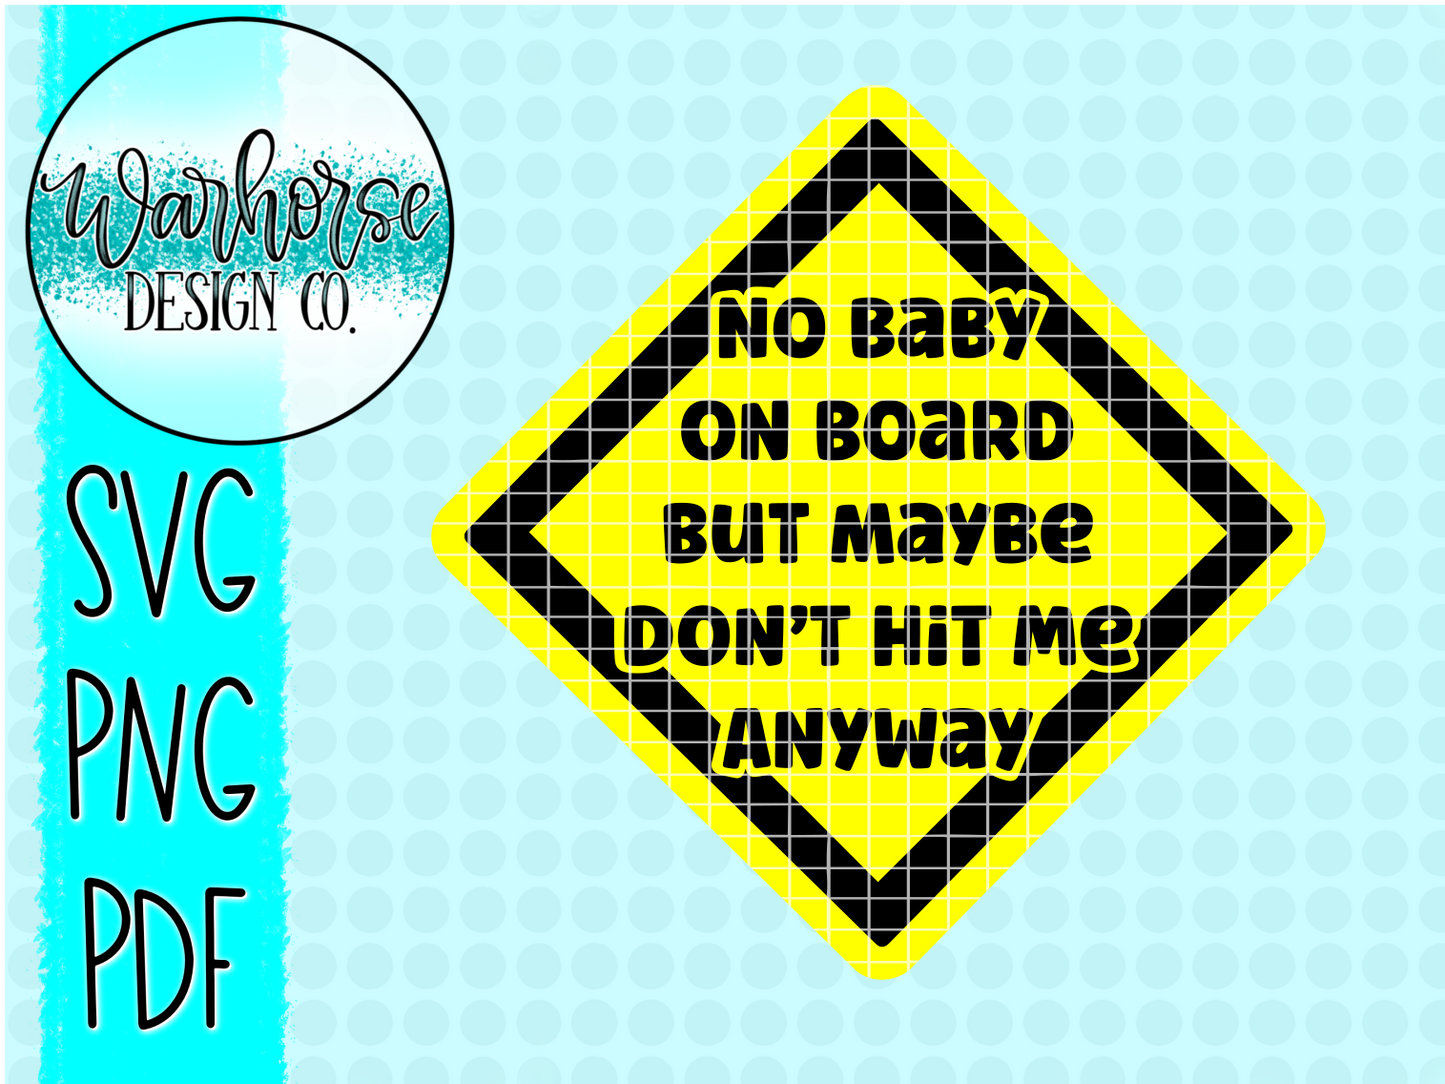 No baby on Board but maybe don't hit me anyway SVG PNG PDF